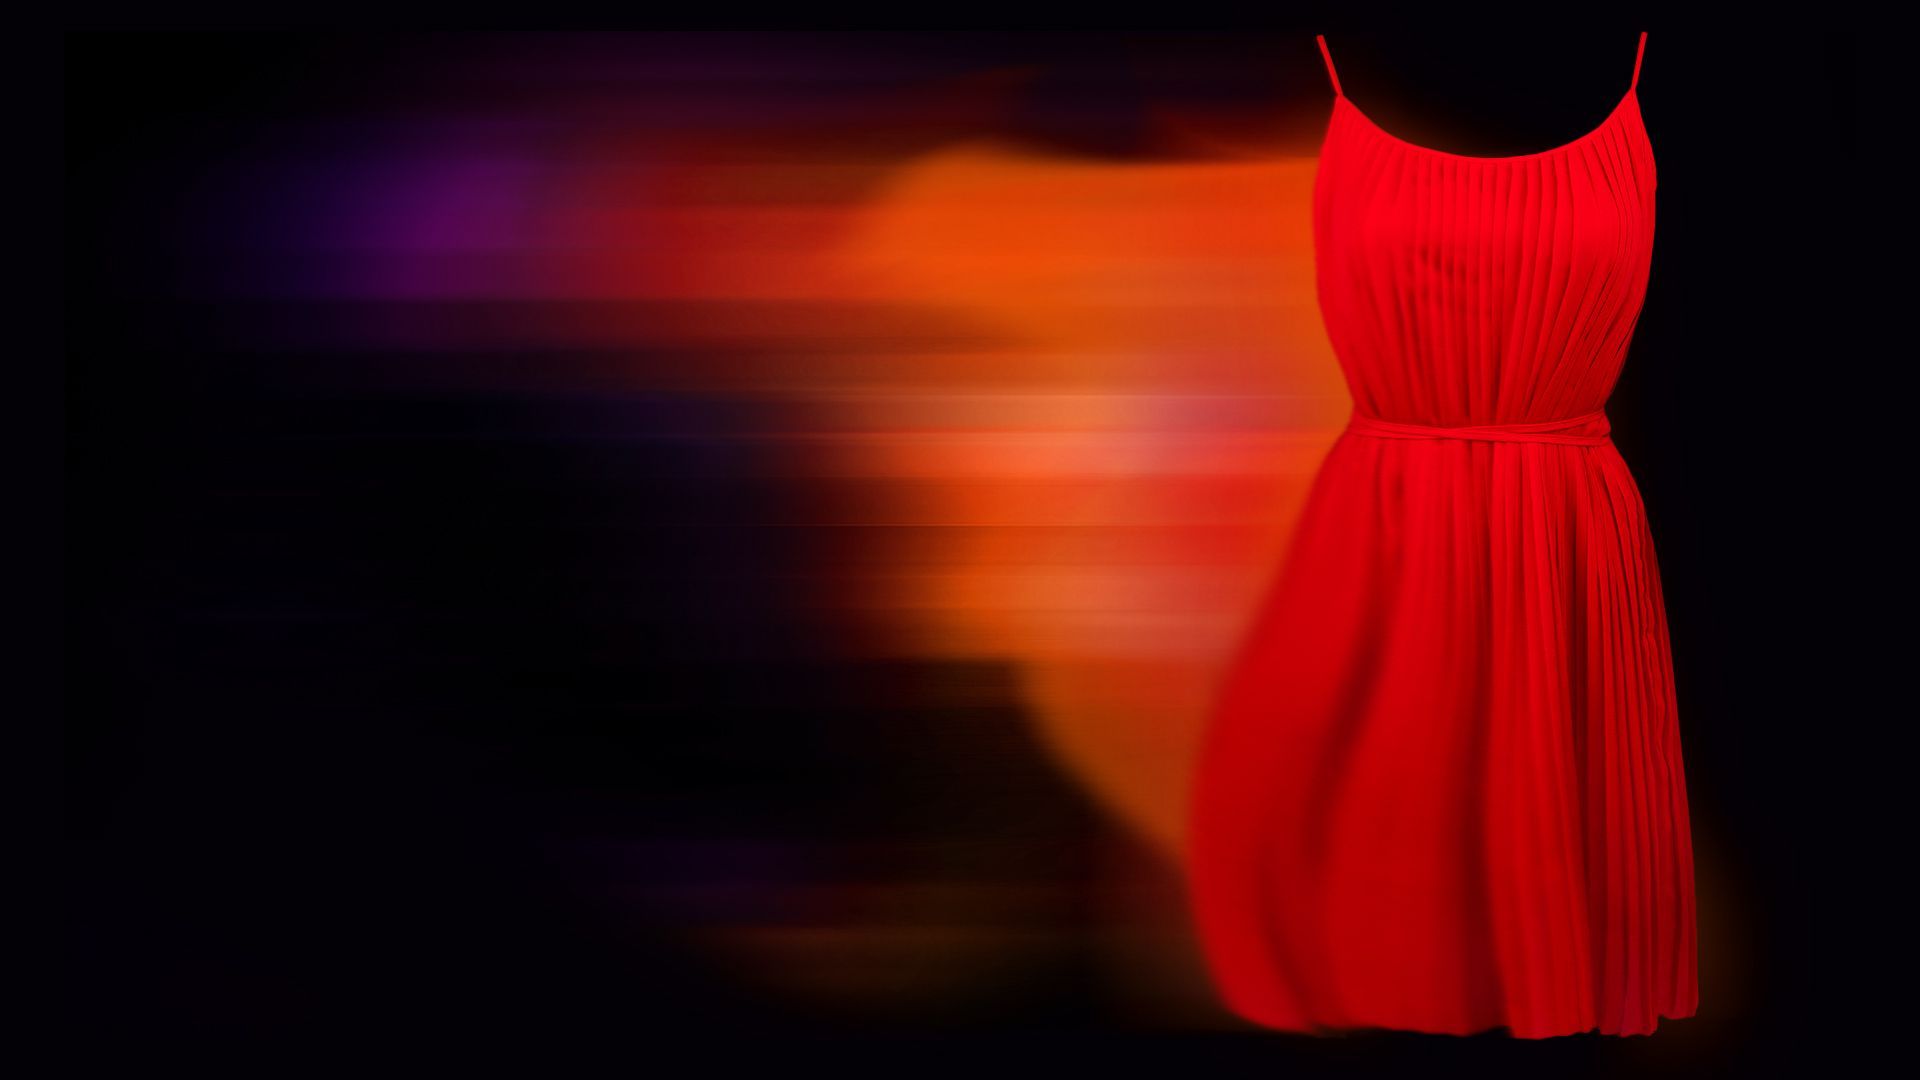 Illustration of a dress with colorful motion blur trailing it